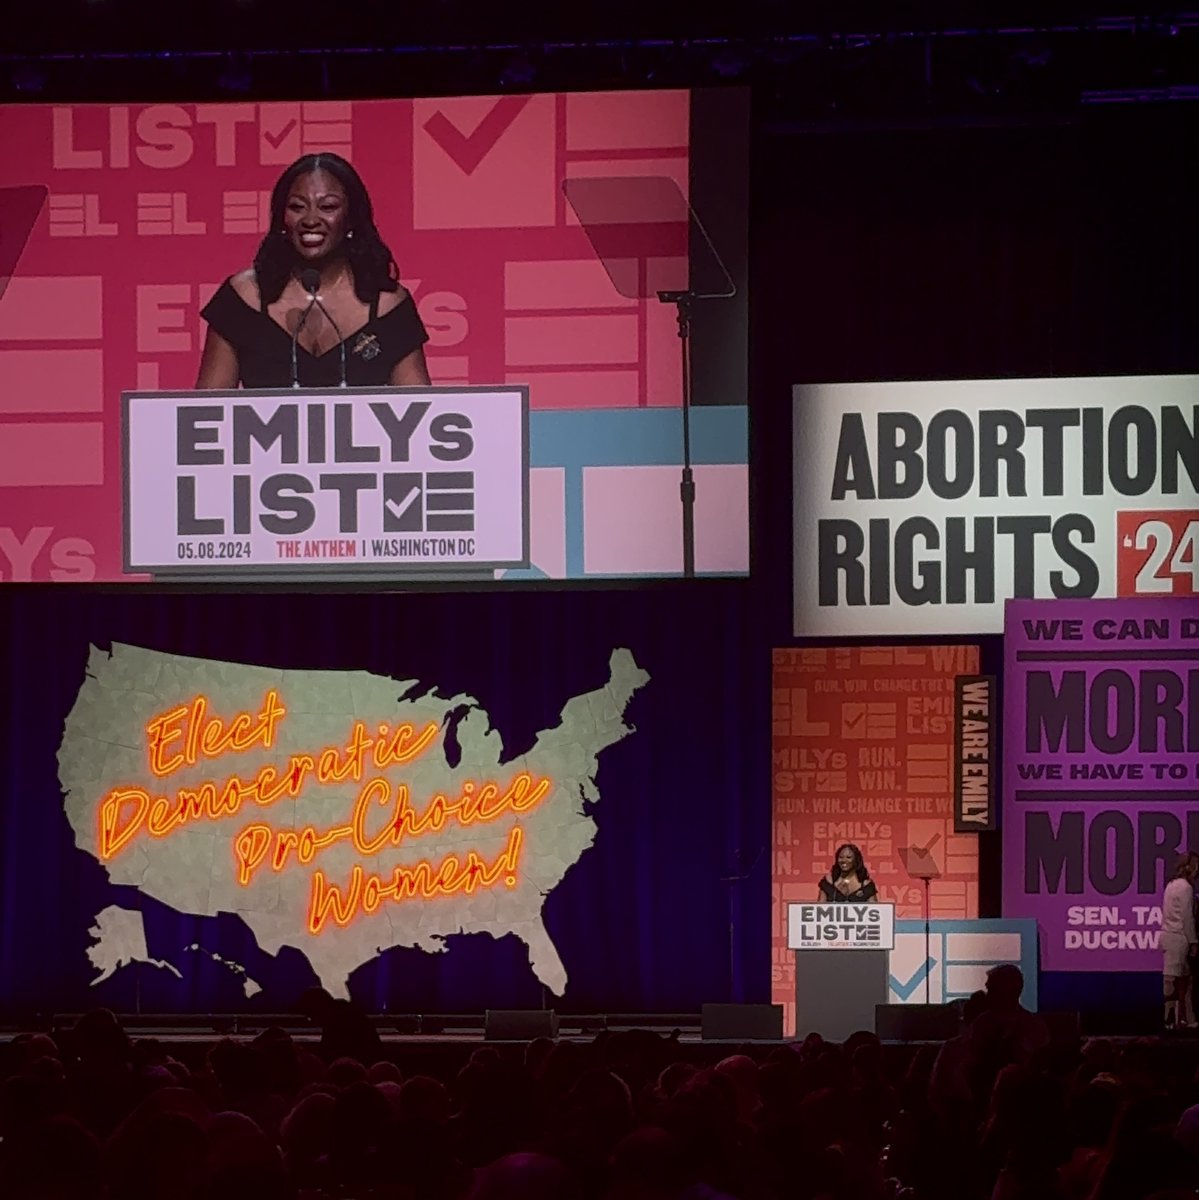 I was beaming with pride to see @SarahAnthony517 on the main stage last night, receiving the Rising Star award at the @emilyslist gala last night. We are a long way from 2018, when Sarah and I knocked doors together in Lansing. Now she’s the first Black woman to serve as…